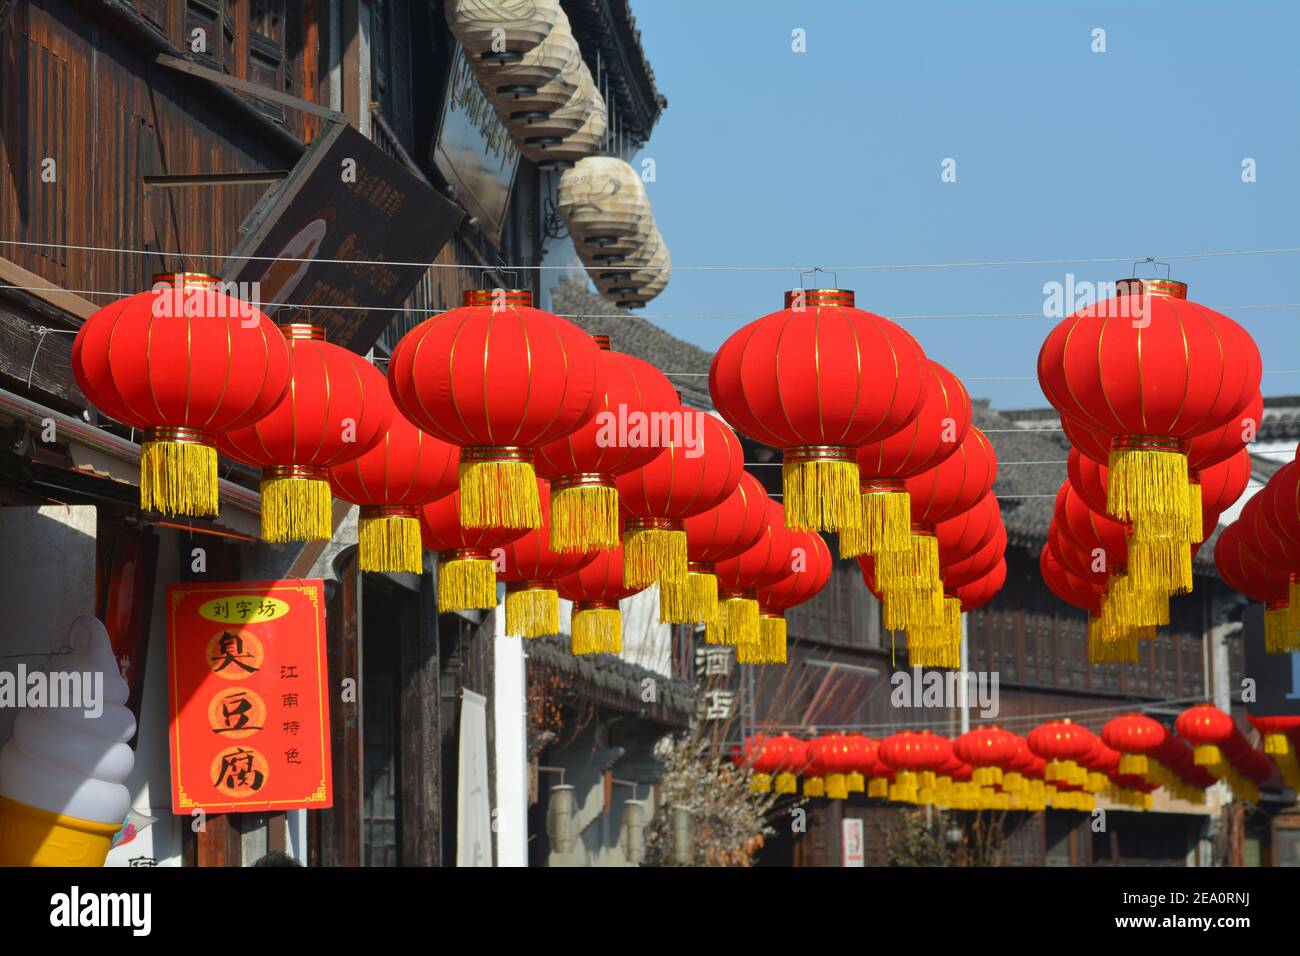 Red lanterns and Chinese New Year lanterns in Jiaxing,China. 2021 year of the ox. Shops and streets all colourfully decorated to celebrate. Stock Photo